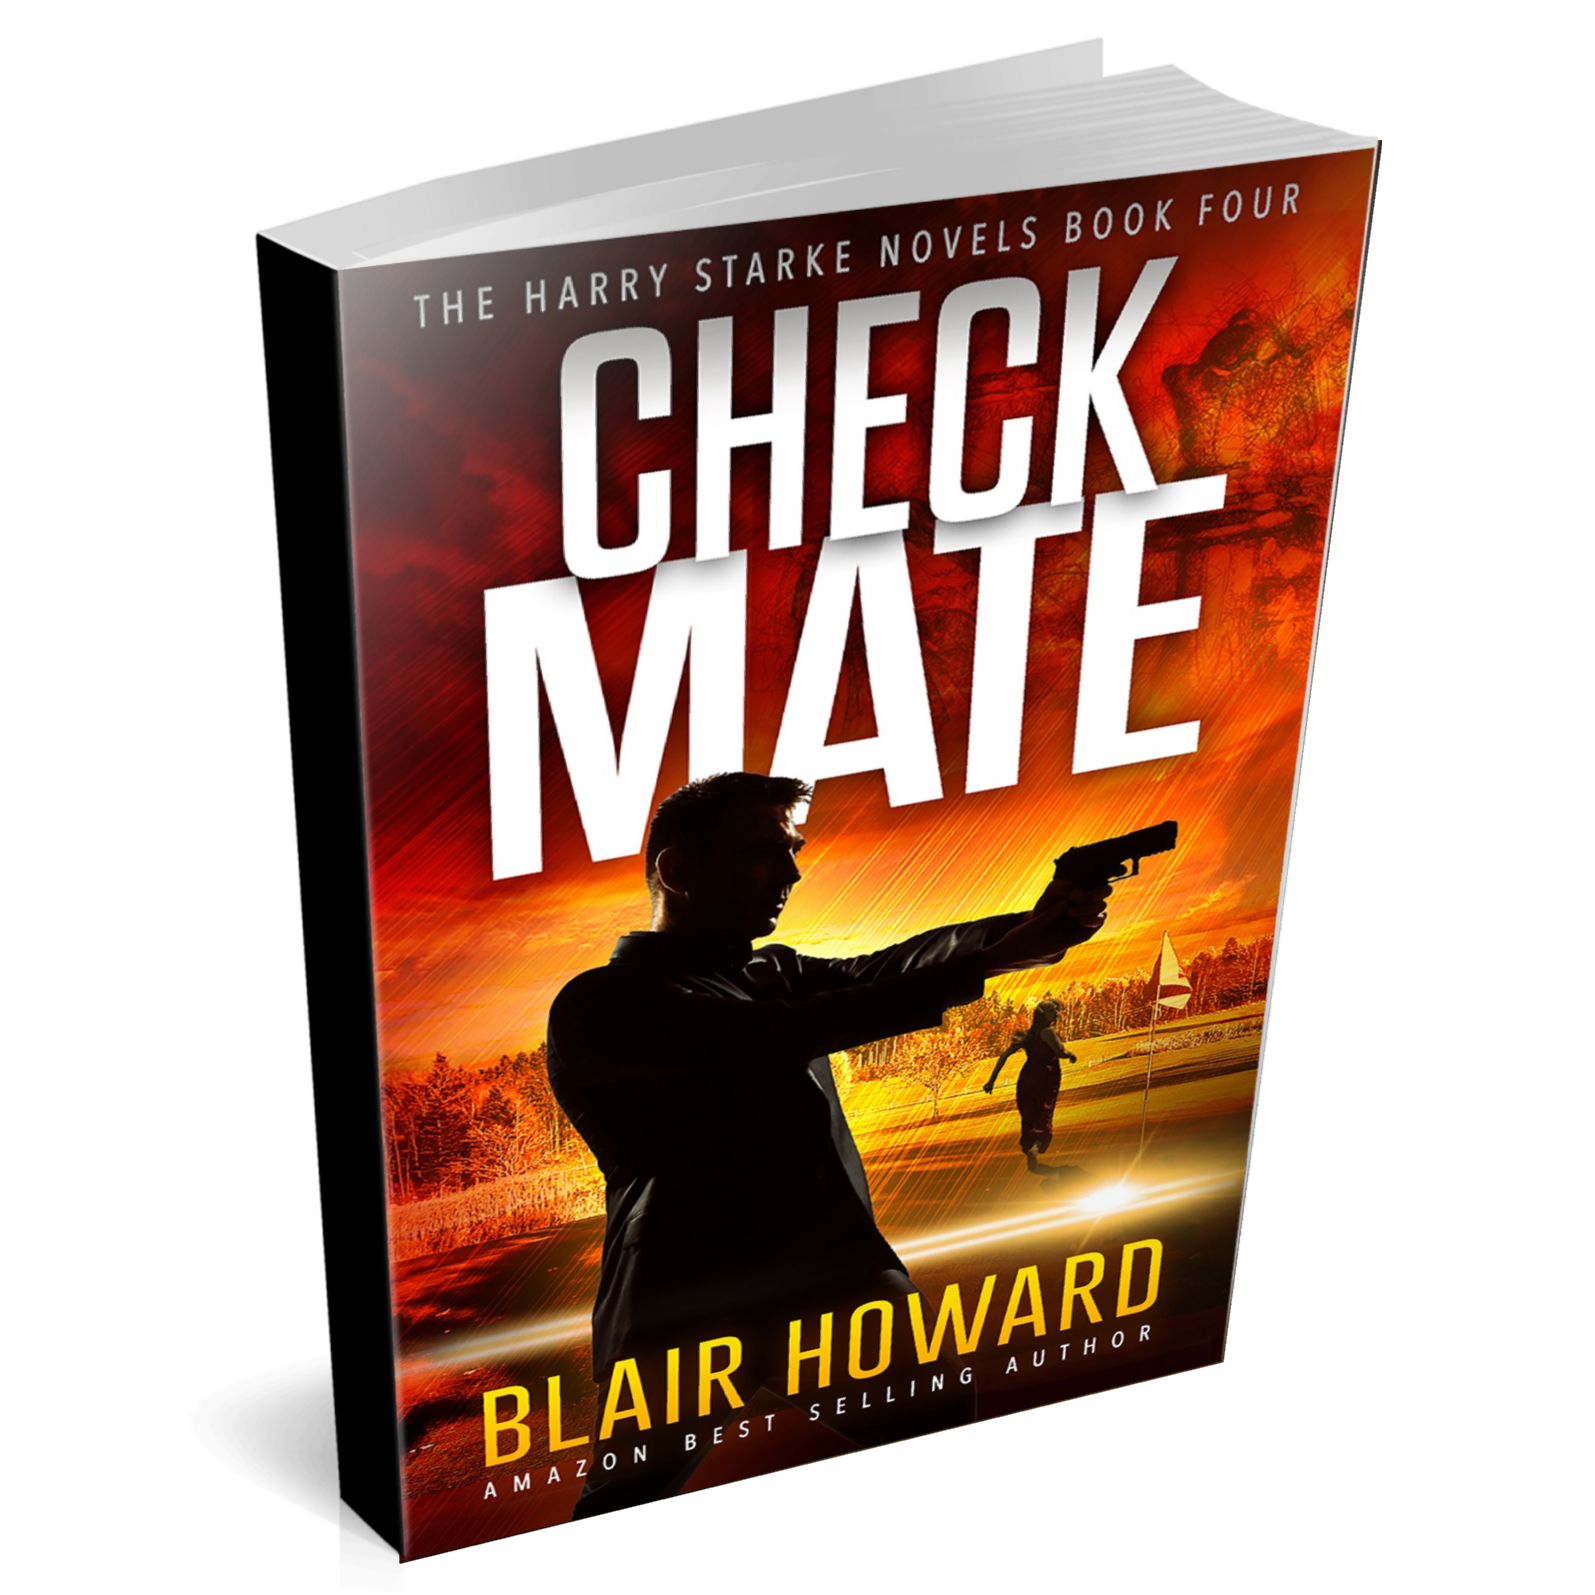 Checkmate (The Harry Starke Novels Book 4) - Kindle edition by